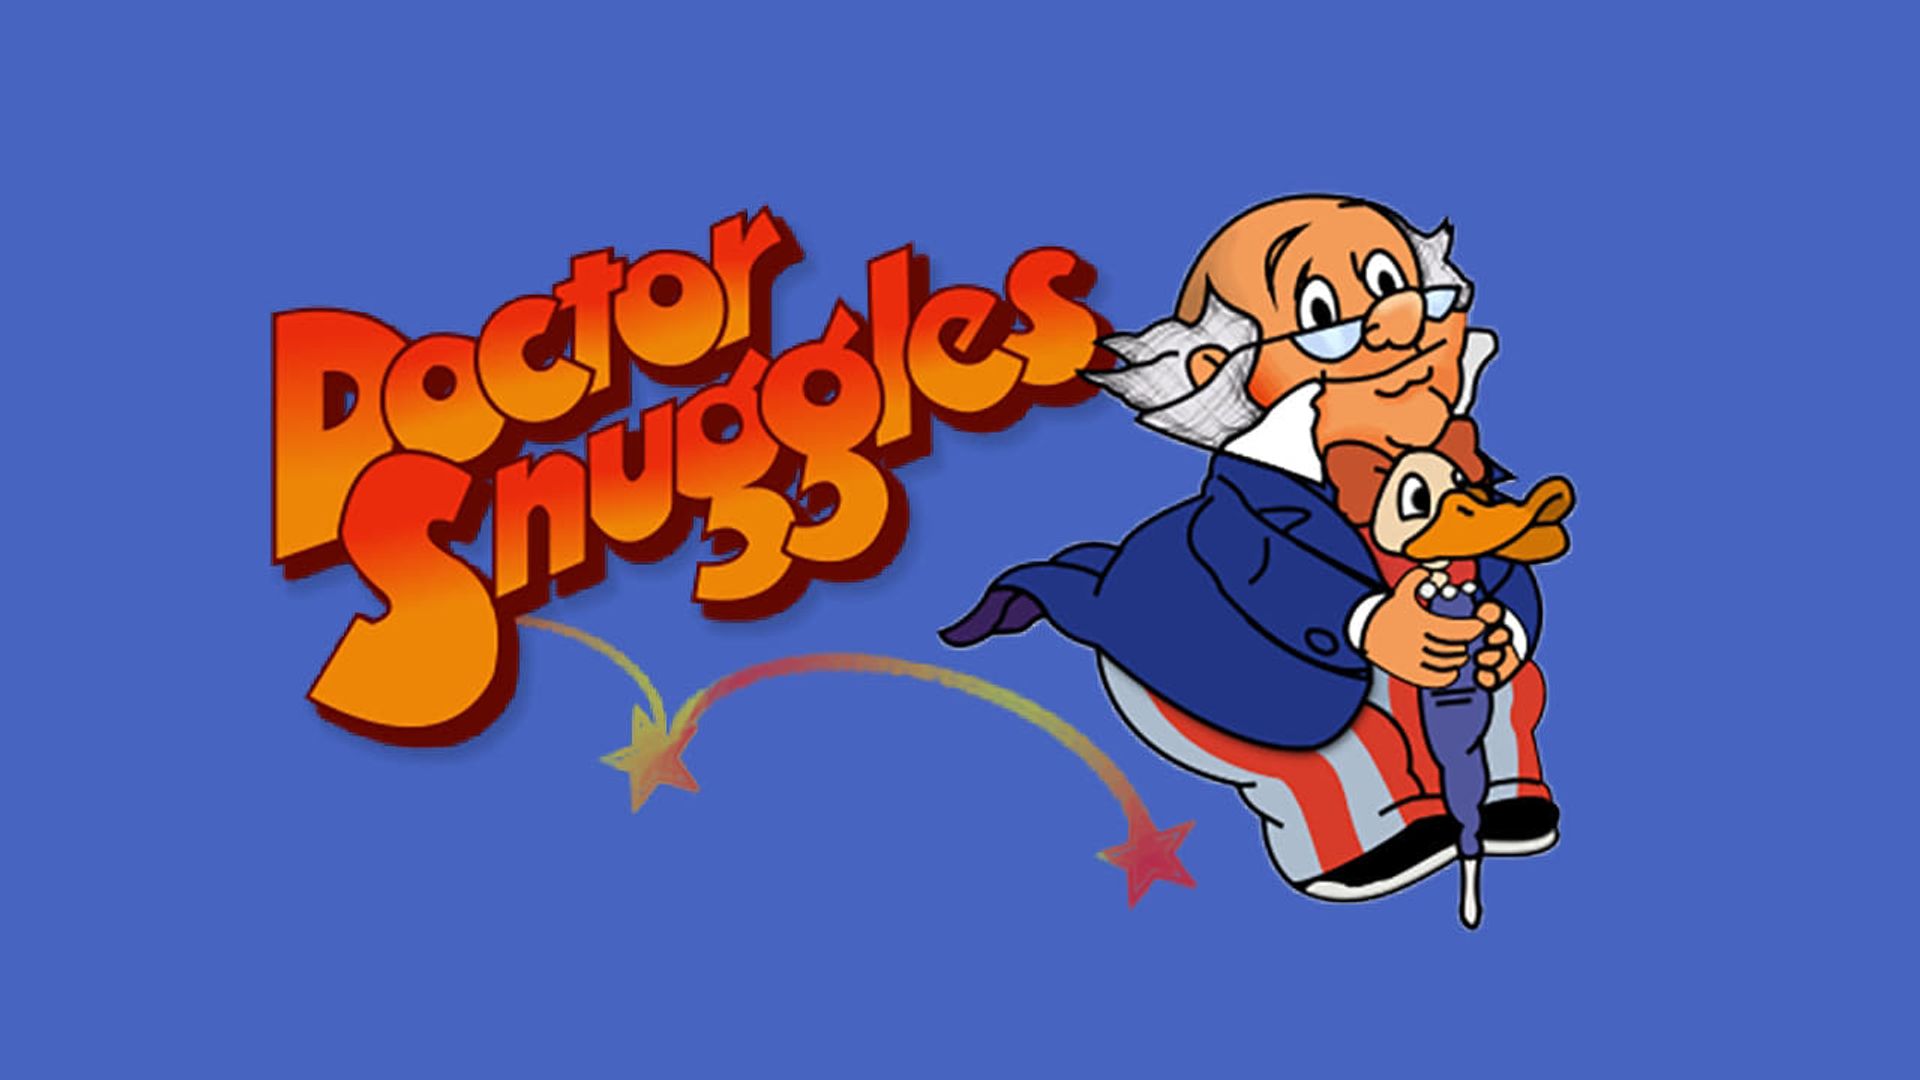 Doctor Snuggles background